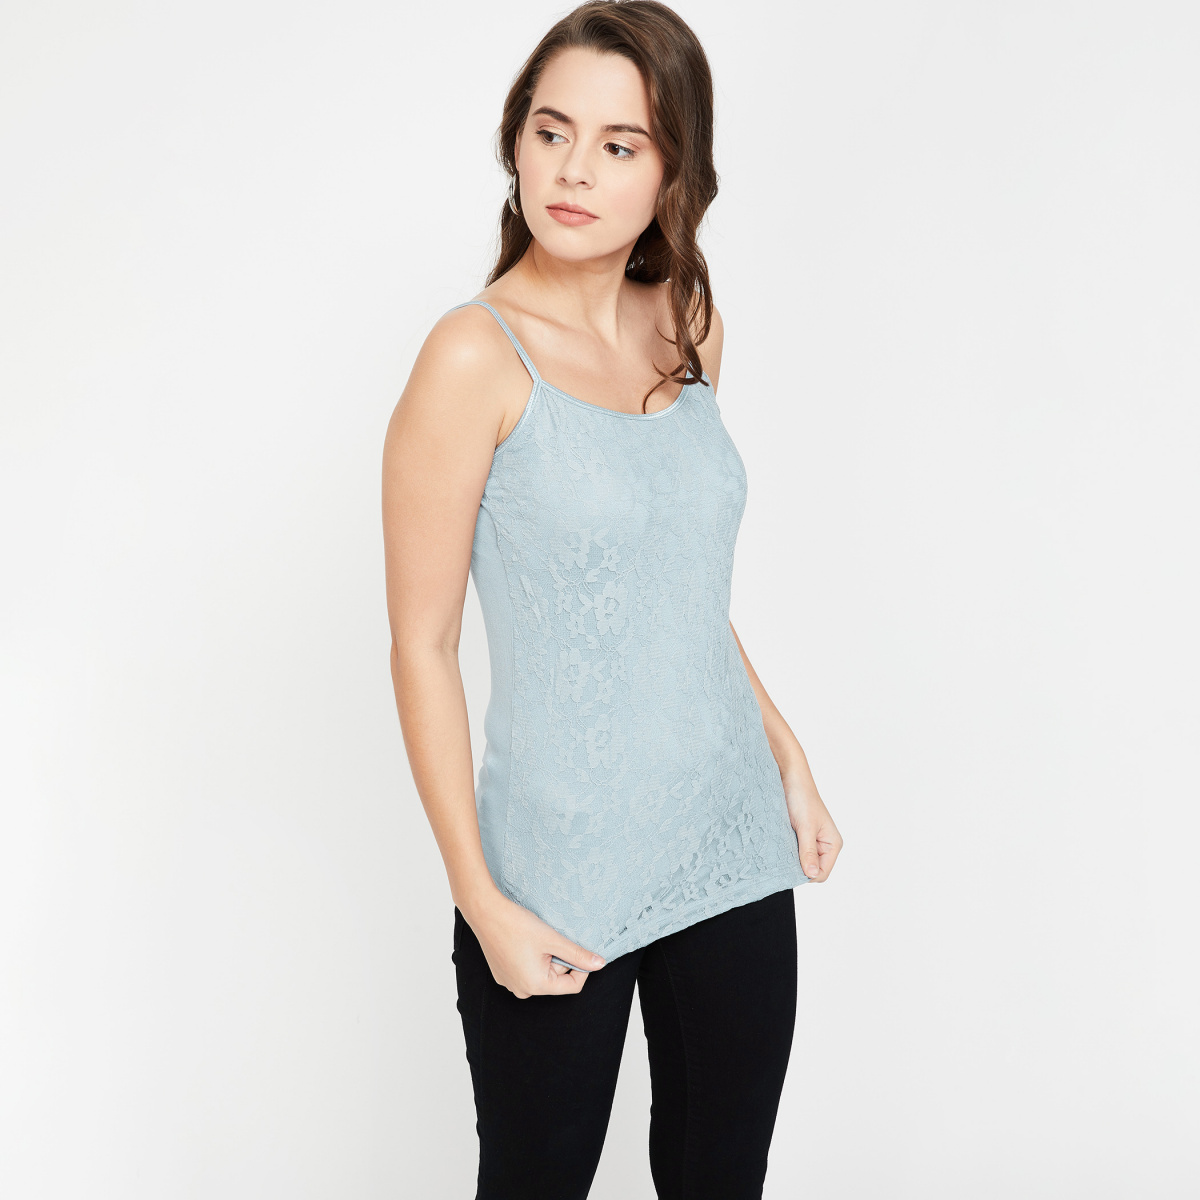 CODE Strappy Regular Fit Top with Lace Insert